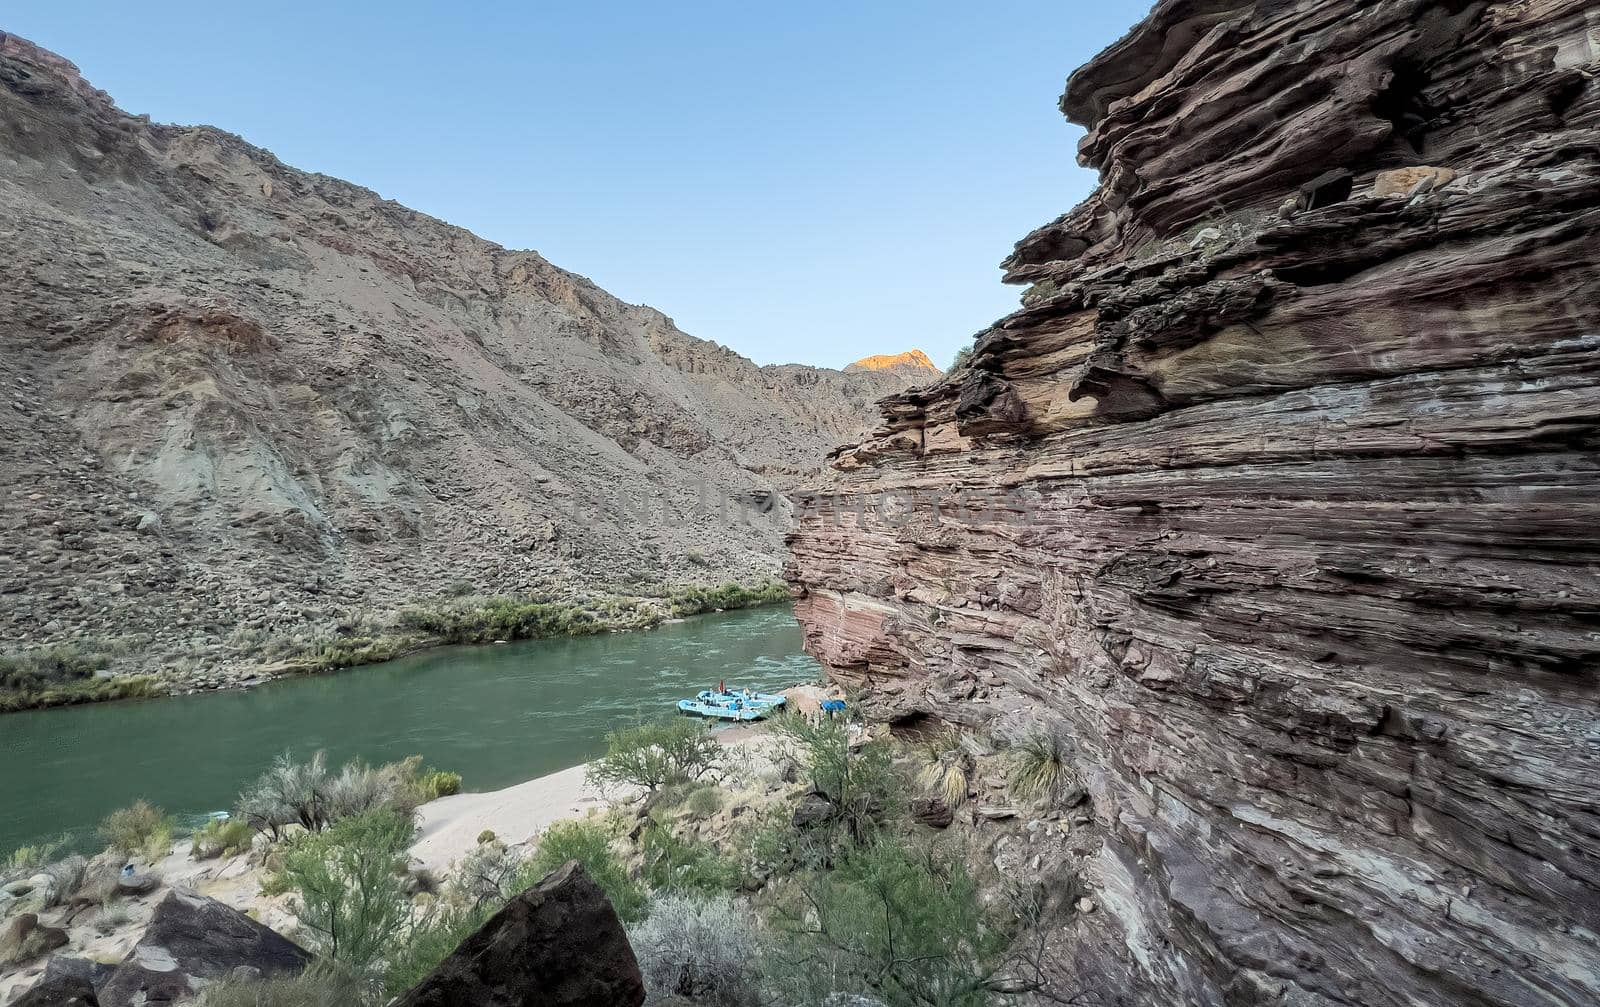 Commercial River Rafting in the Grand Canyon